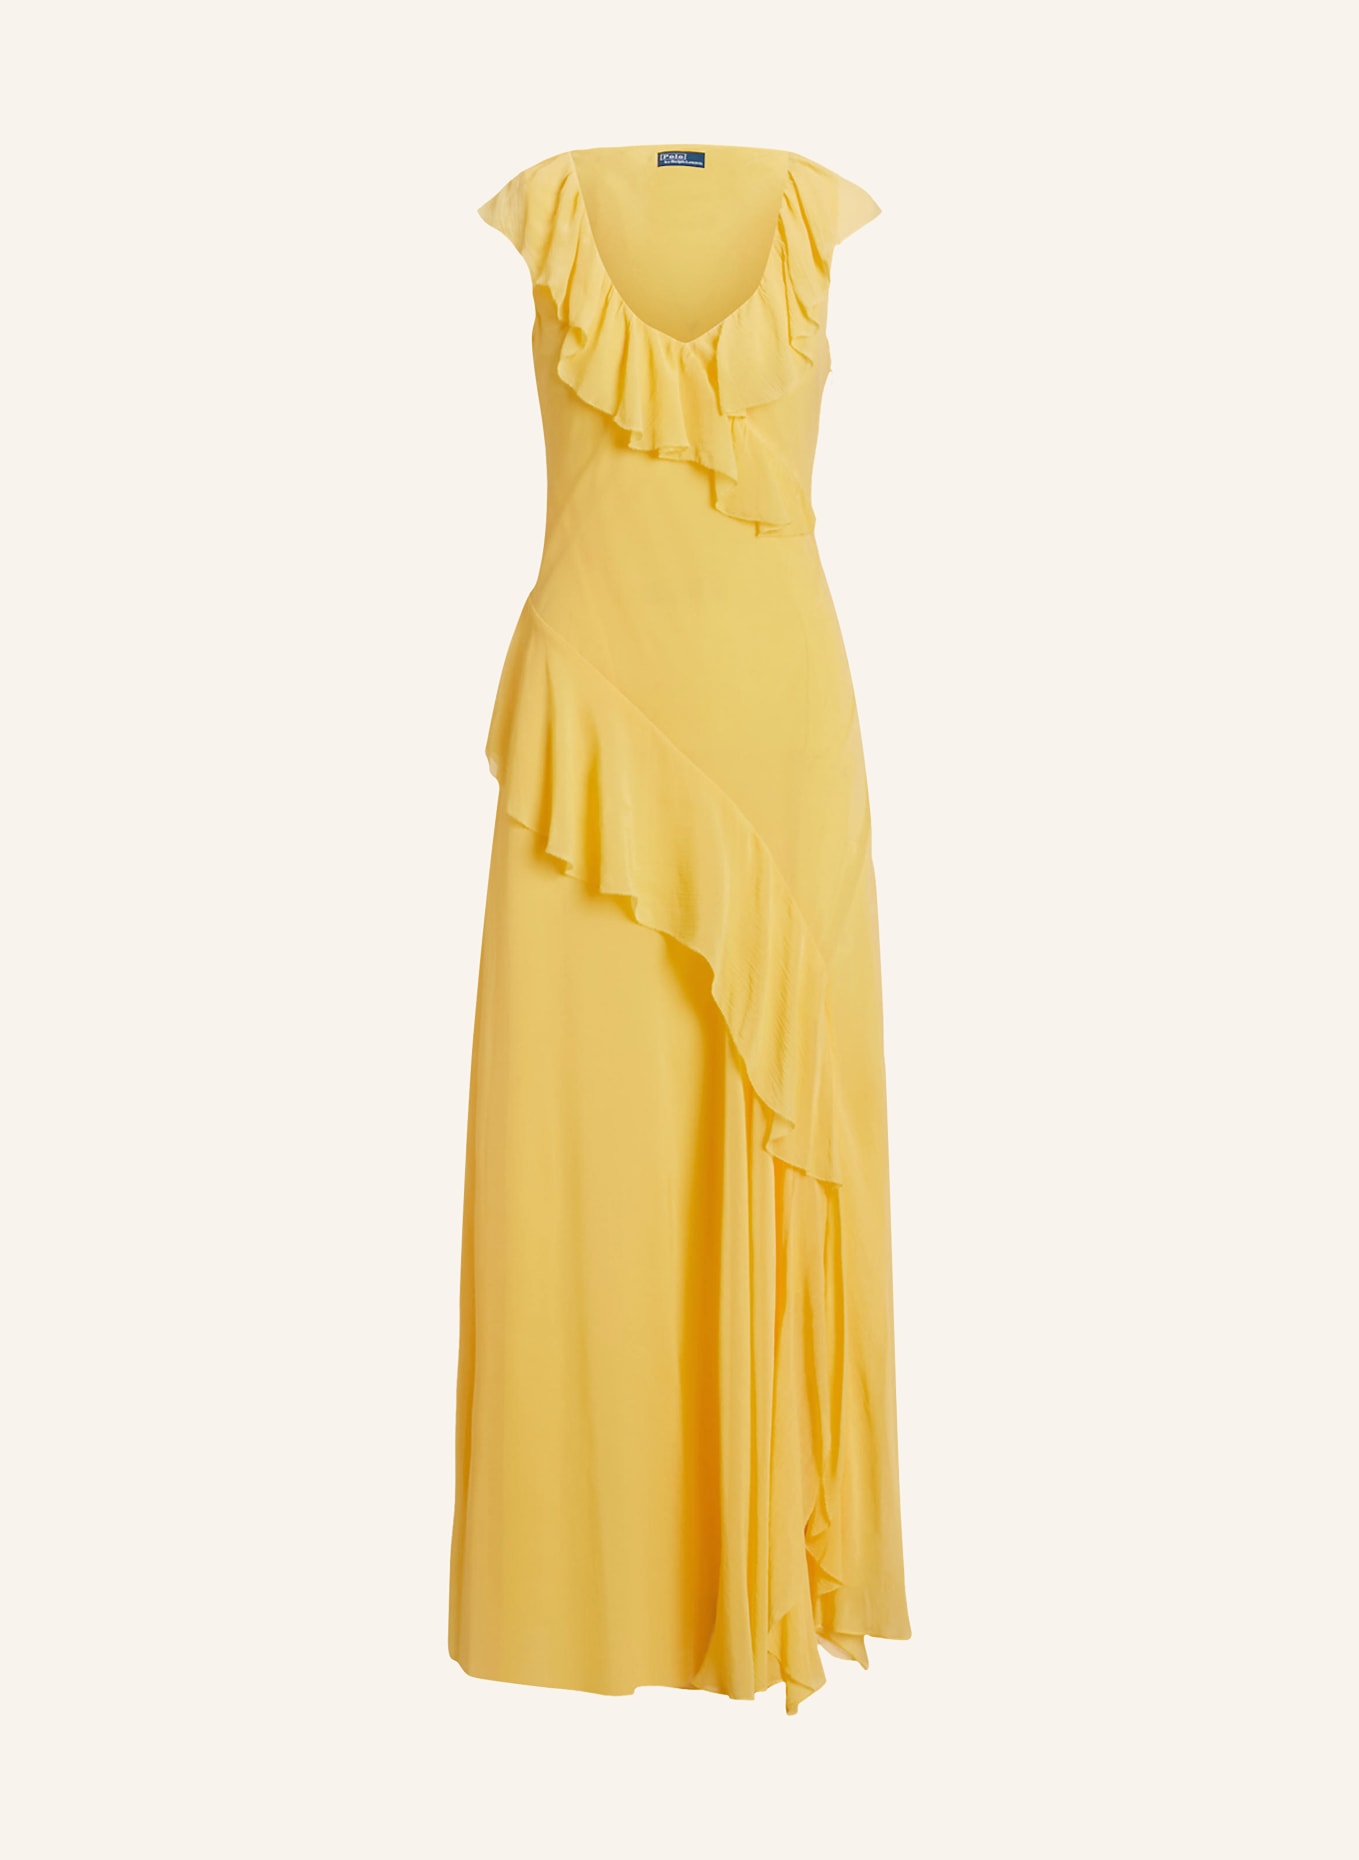 POLO RALPH LAUREN Dress with frills, Color: YELLOW (Image 1)